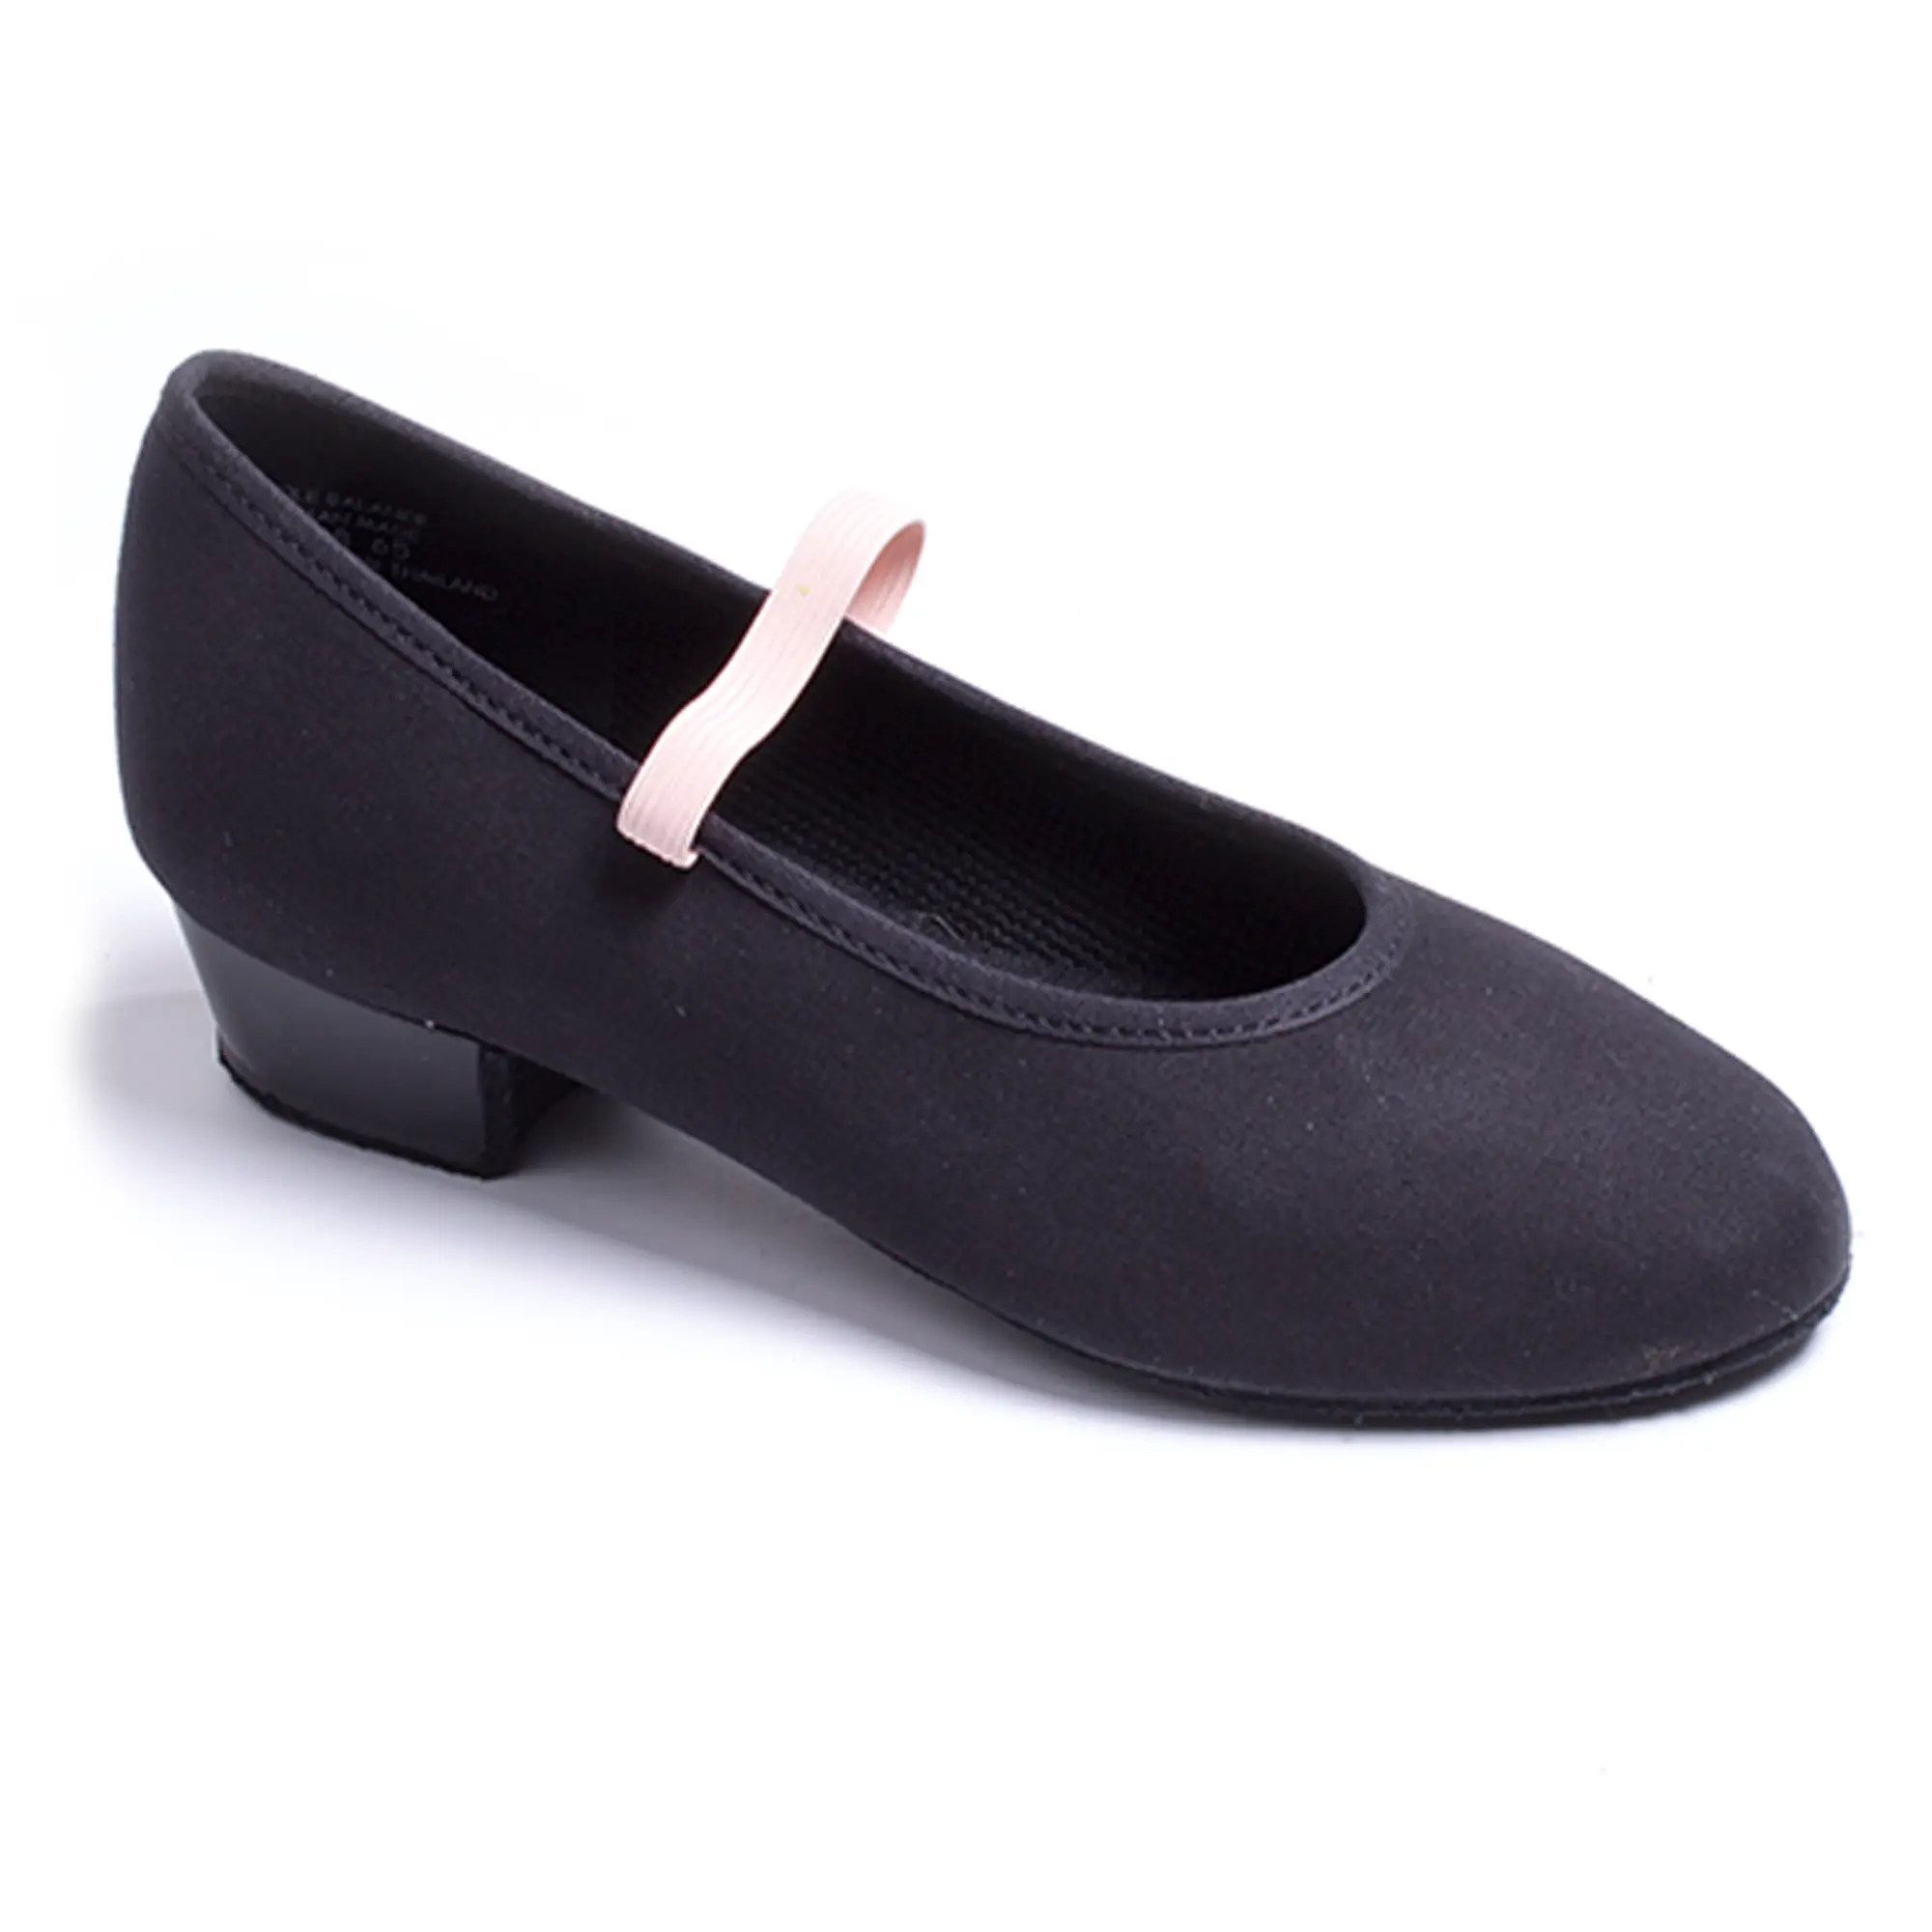 Capezio Academy character 1 heel, character shoes for kids